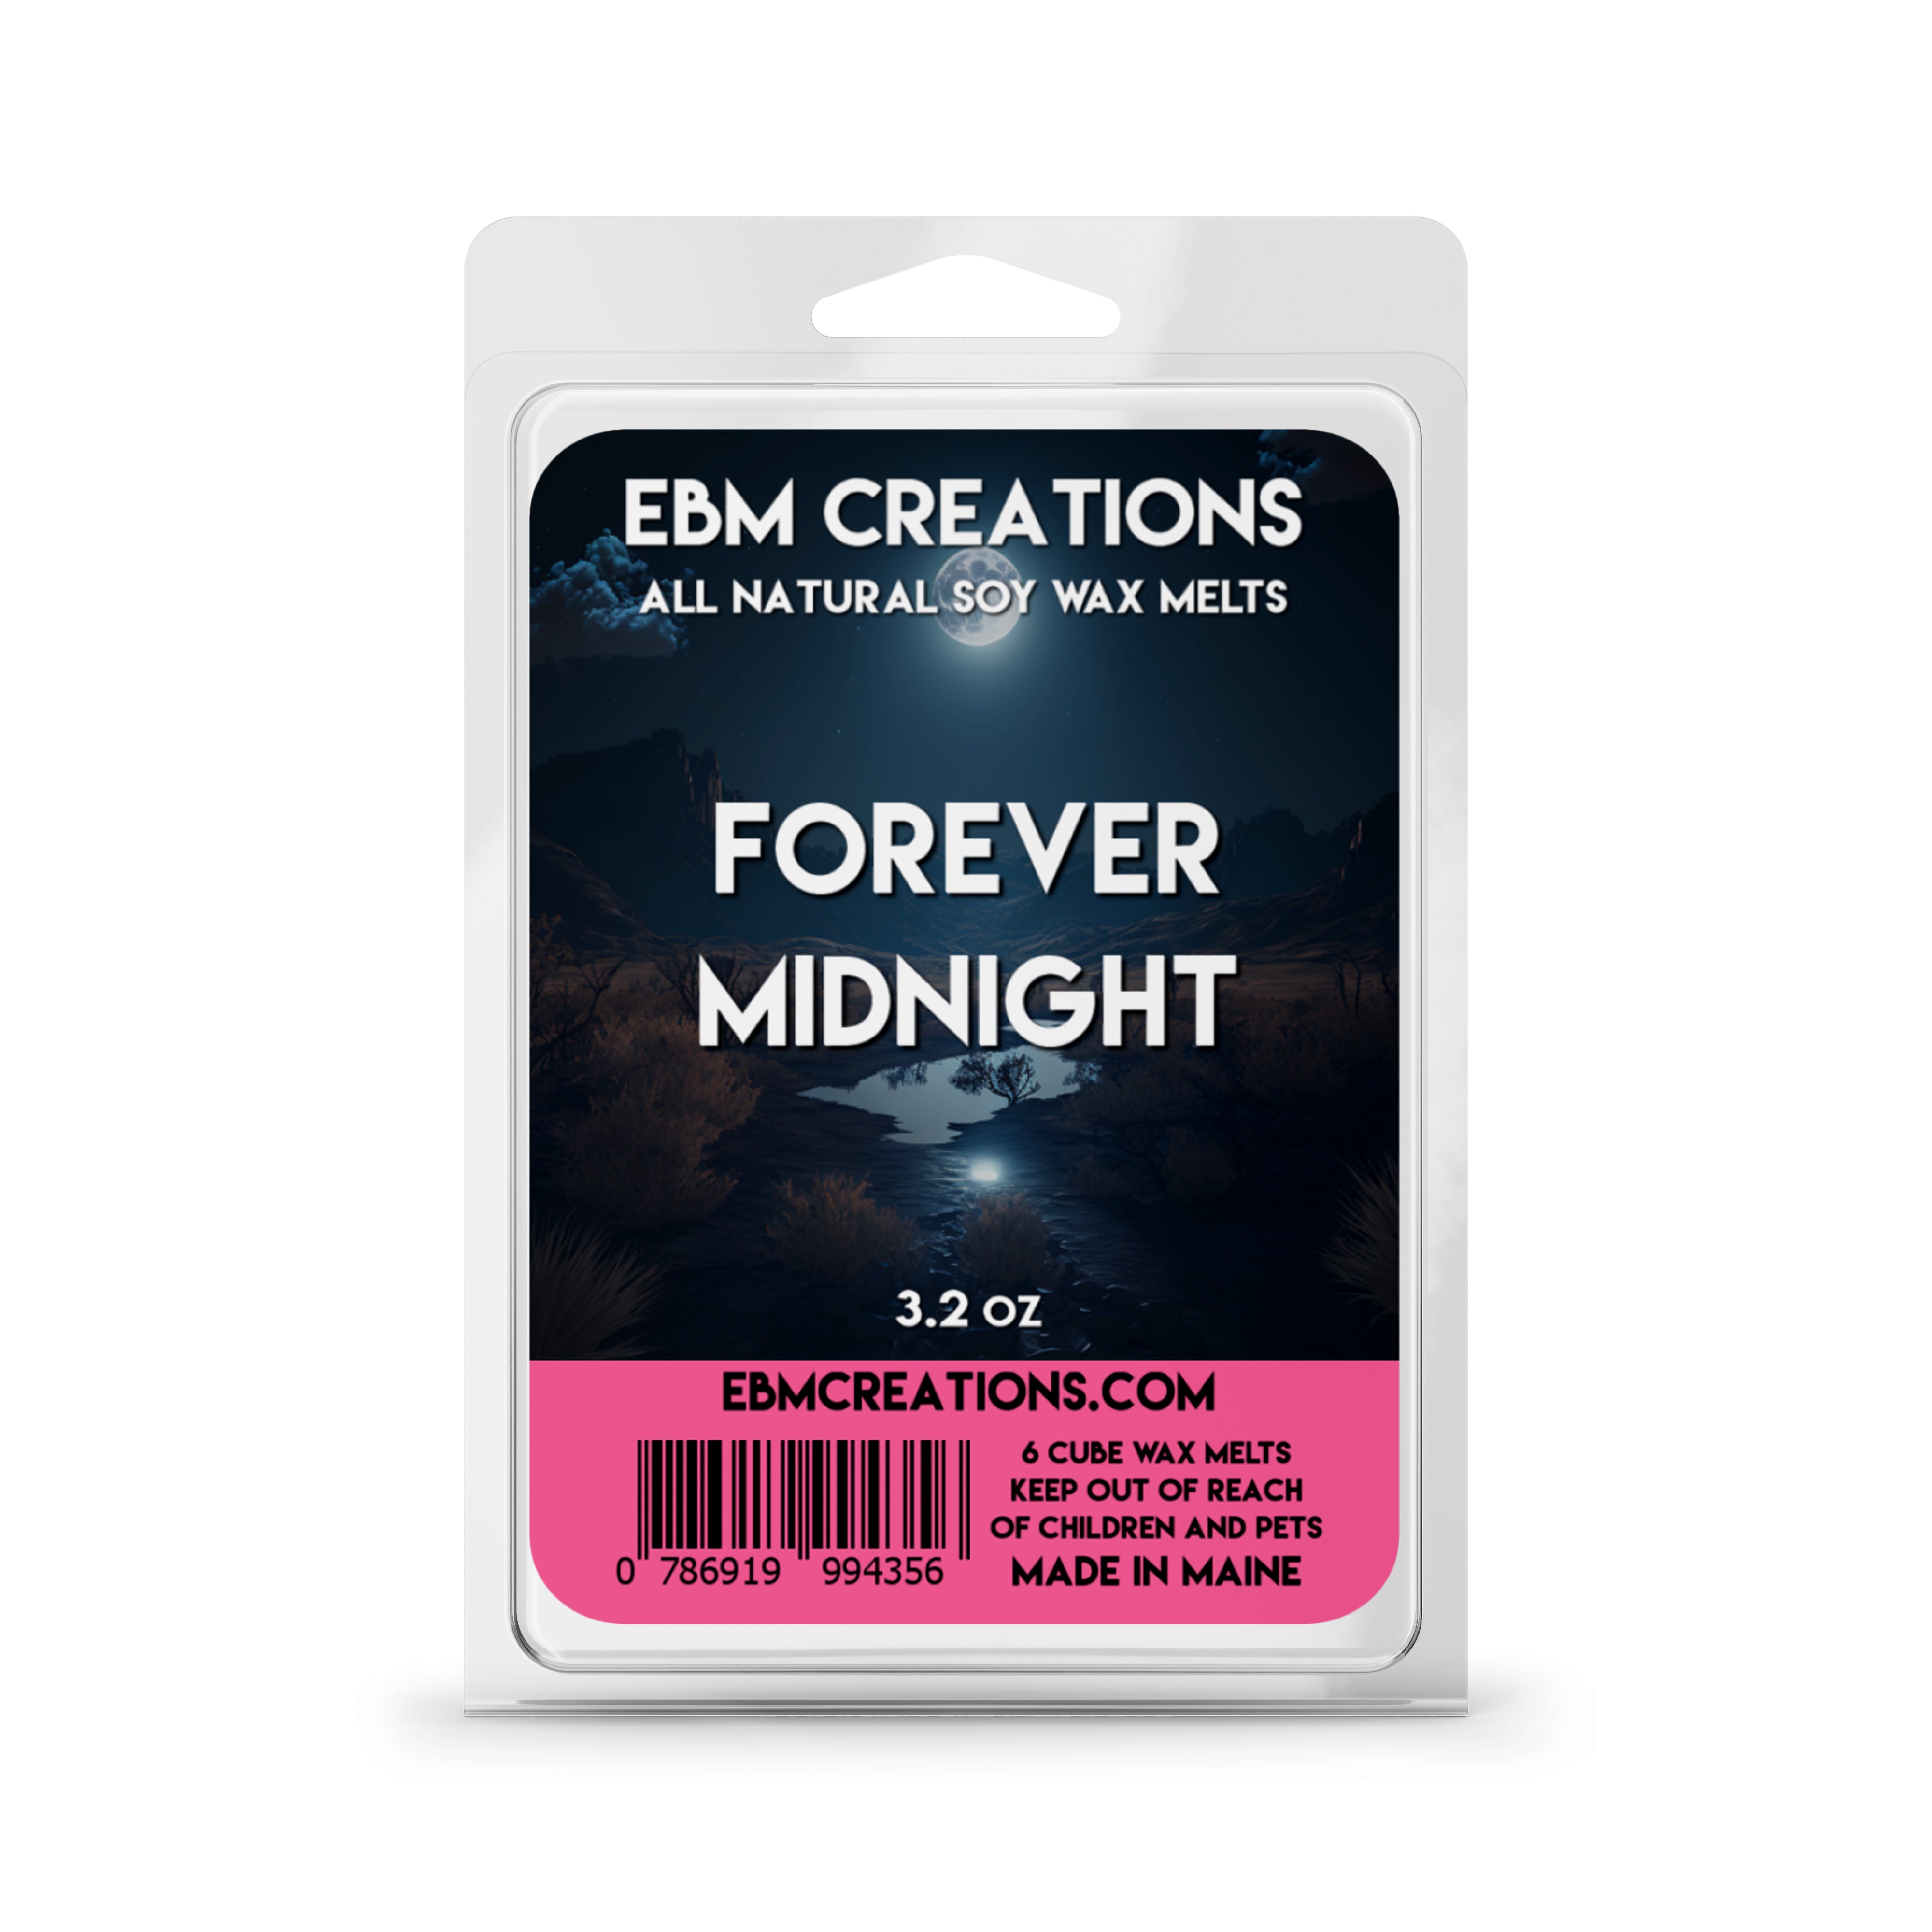 Forever Midnight - 3.2 oz Clamshell